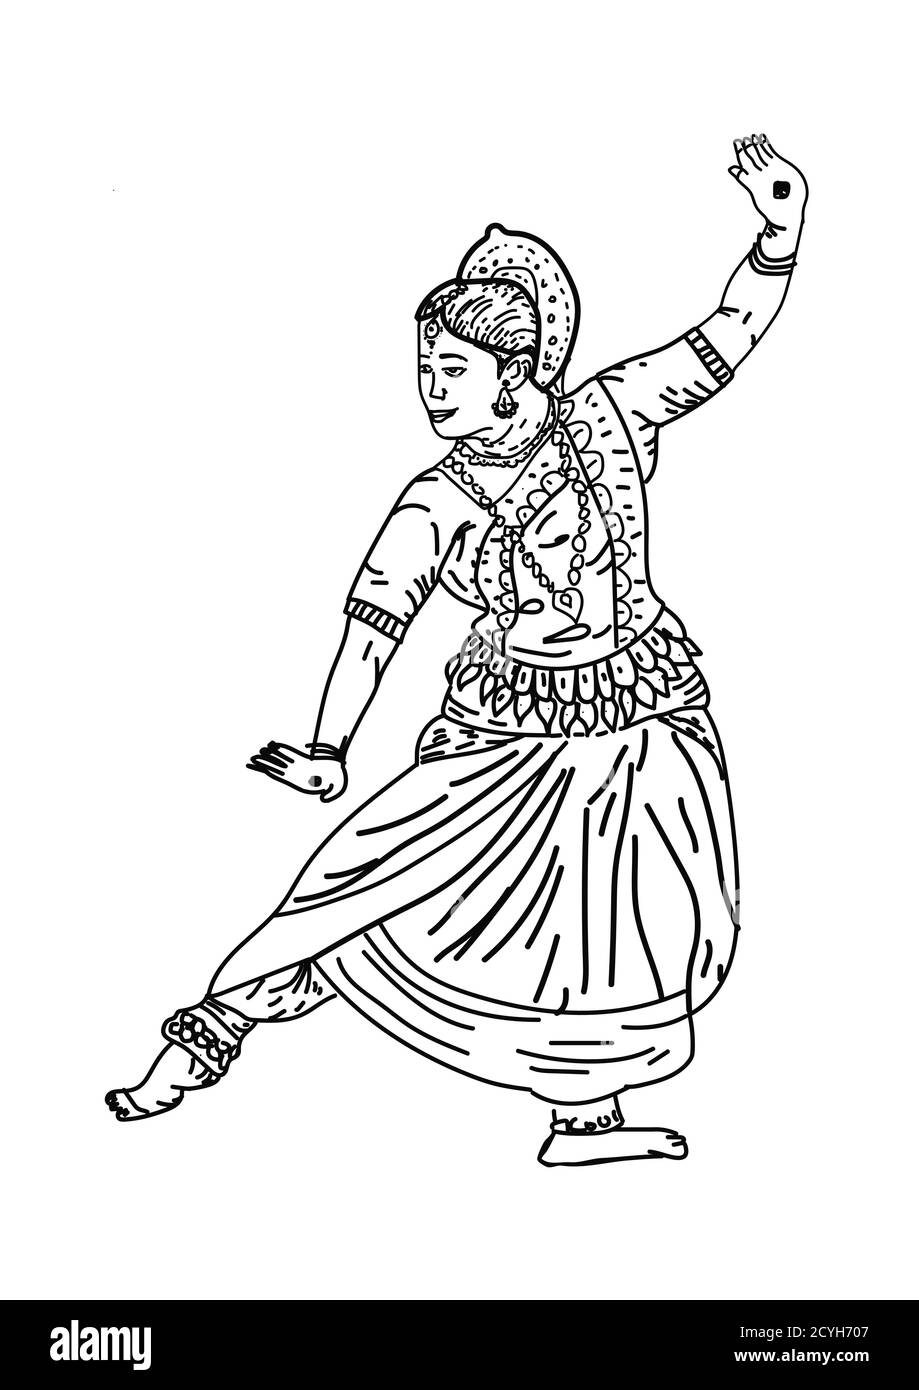 Discover 142+ easy bharatanatyam pencil sketches latest